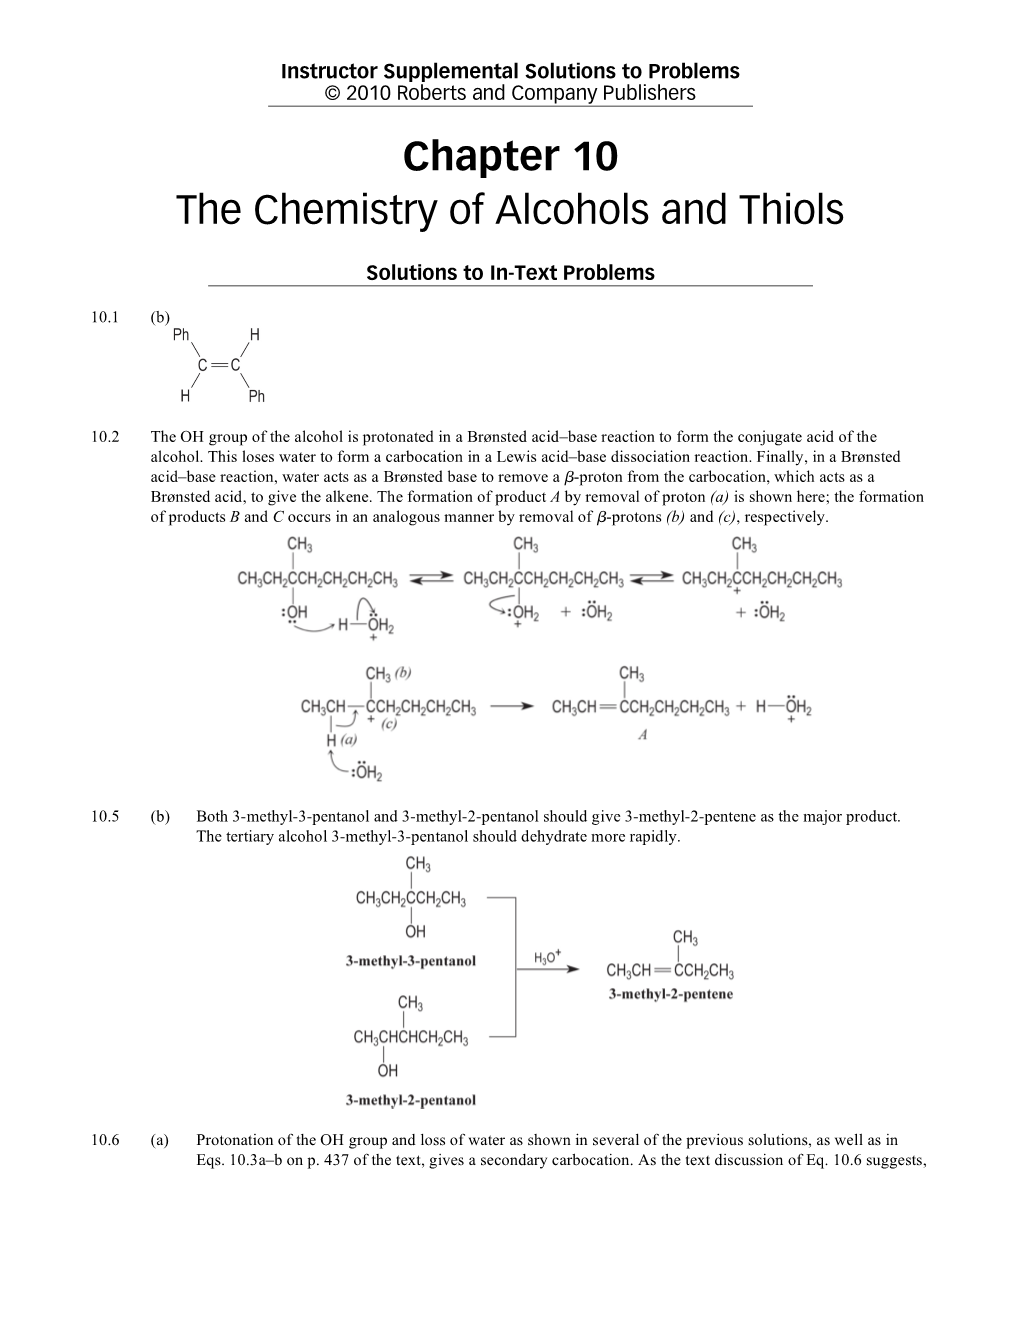 Chapter 10 the Chemistry of Alcohols and Thiols